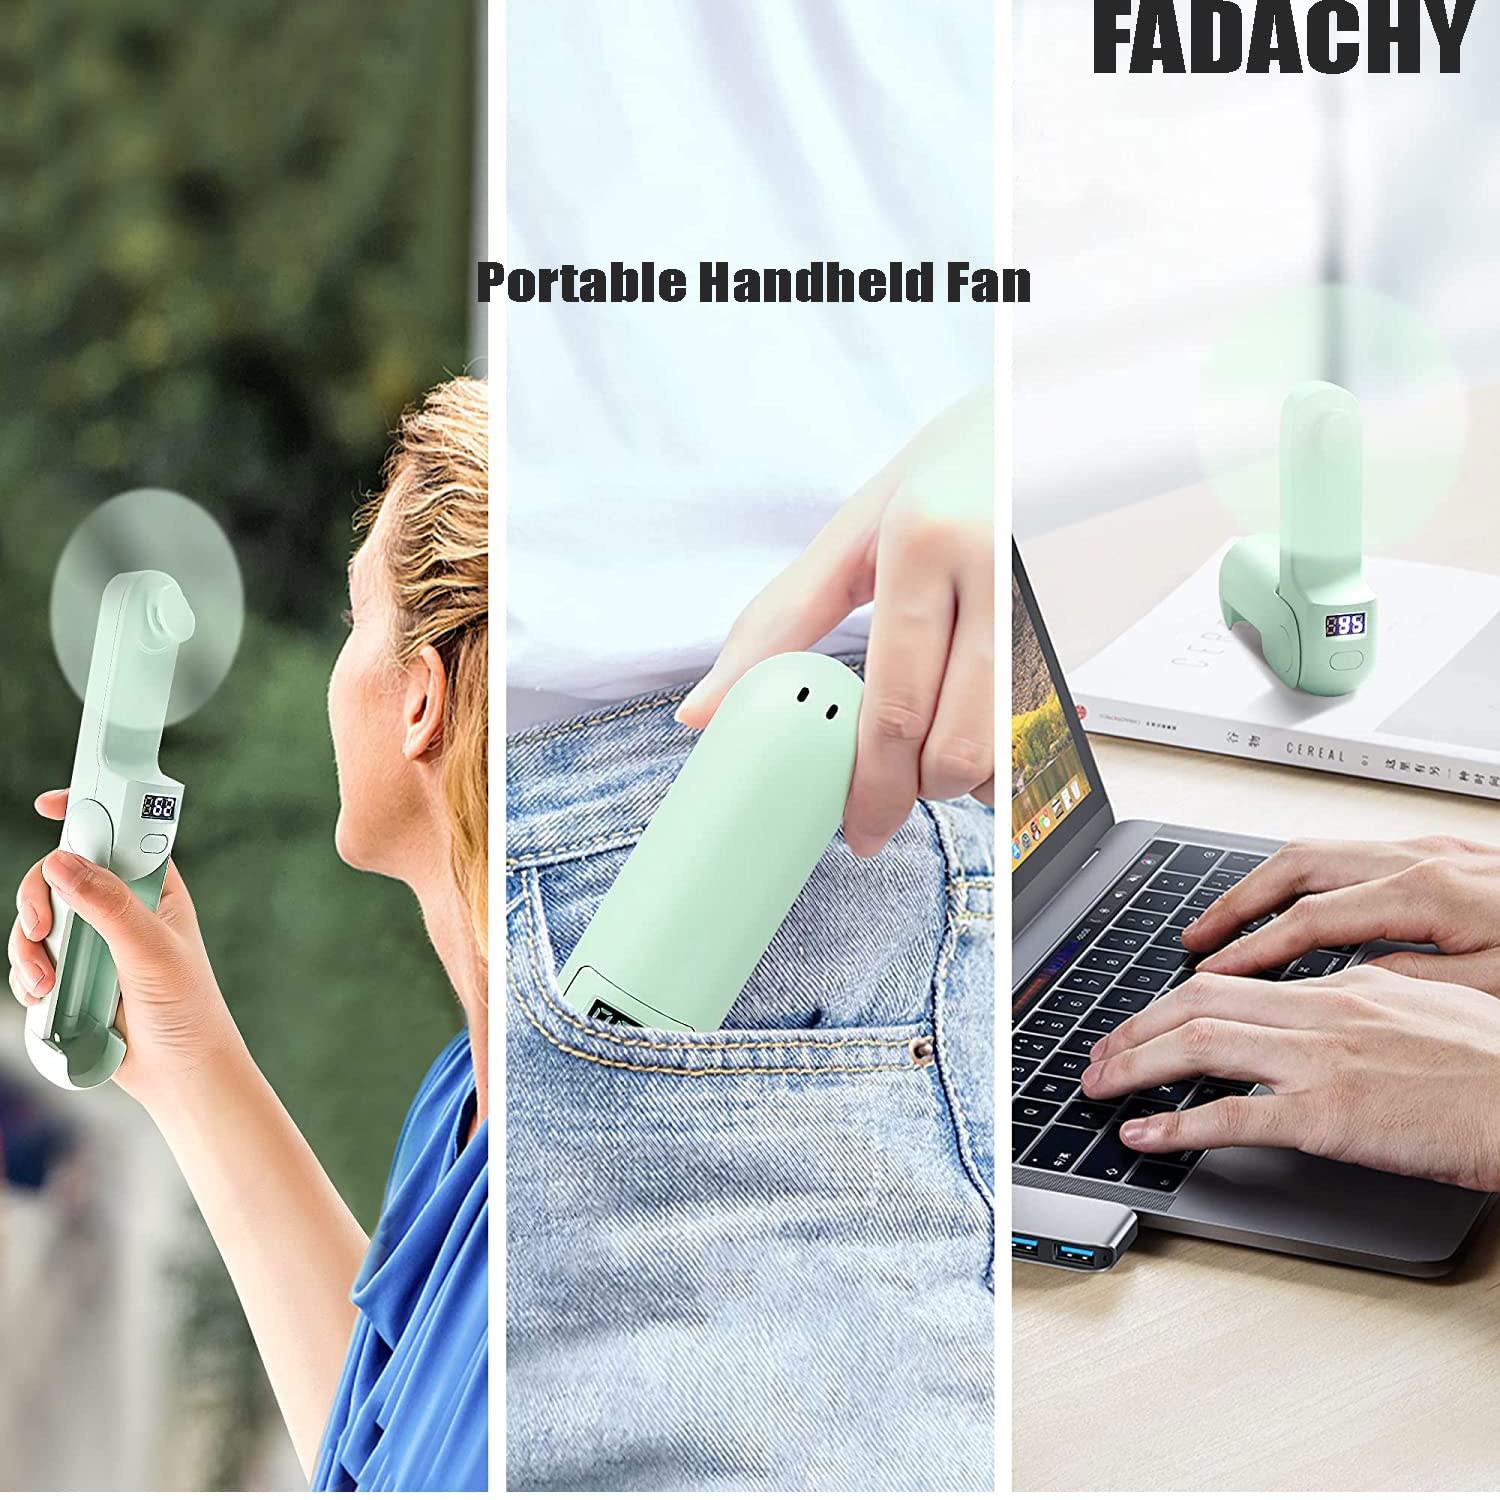 FADACHY Portable Fan Rechargeable,Mini Personal Fan, Handheld Battery Operated Fan,LED Display 14-18 Working Hours 3 IN 1 Folding Hand Fan, Small Travel Essentials Fan for Purse Vacation